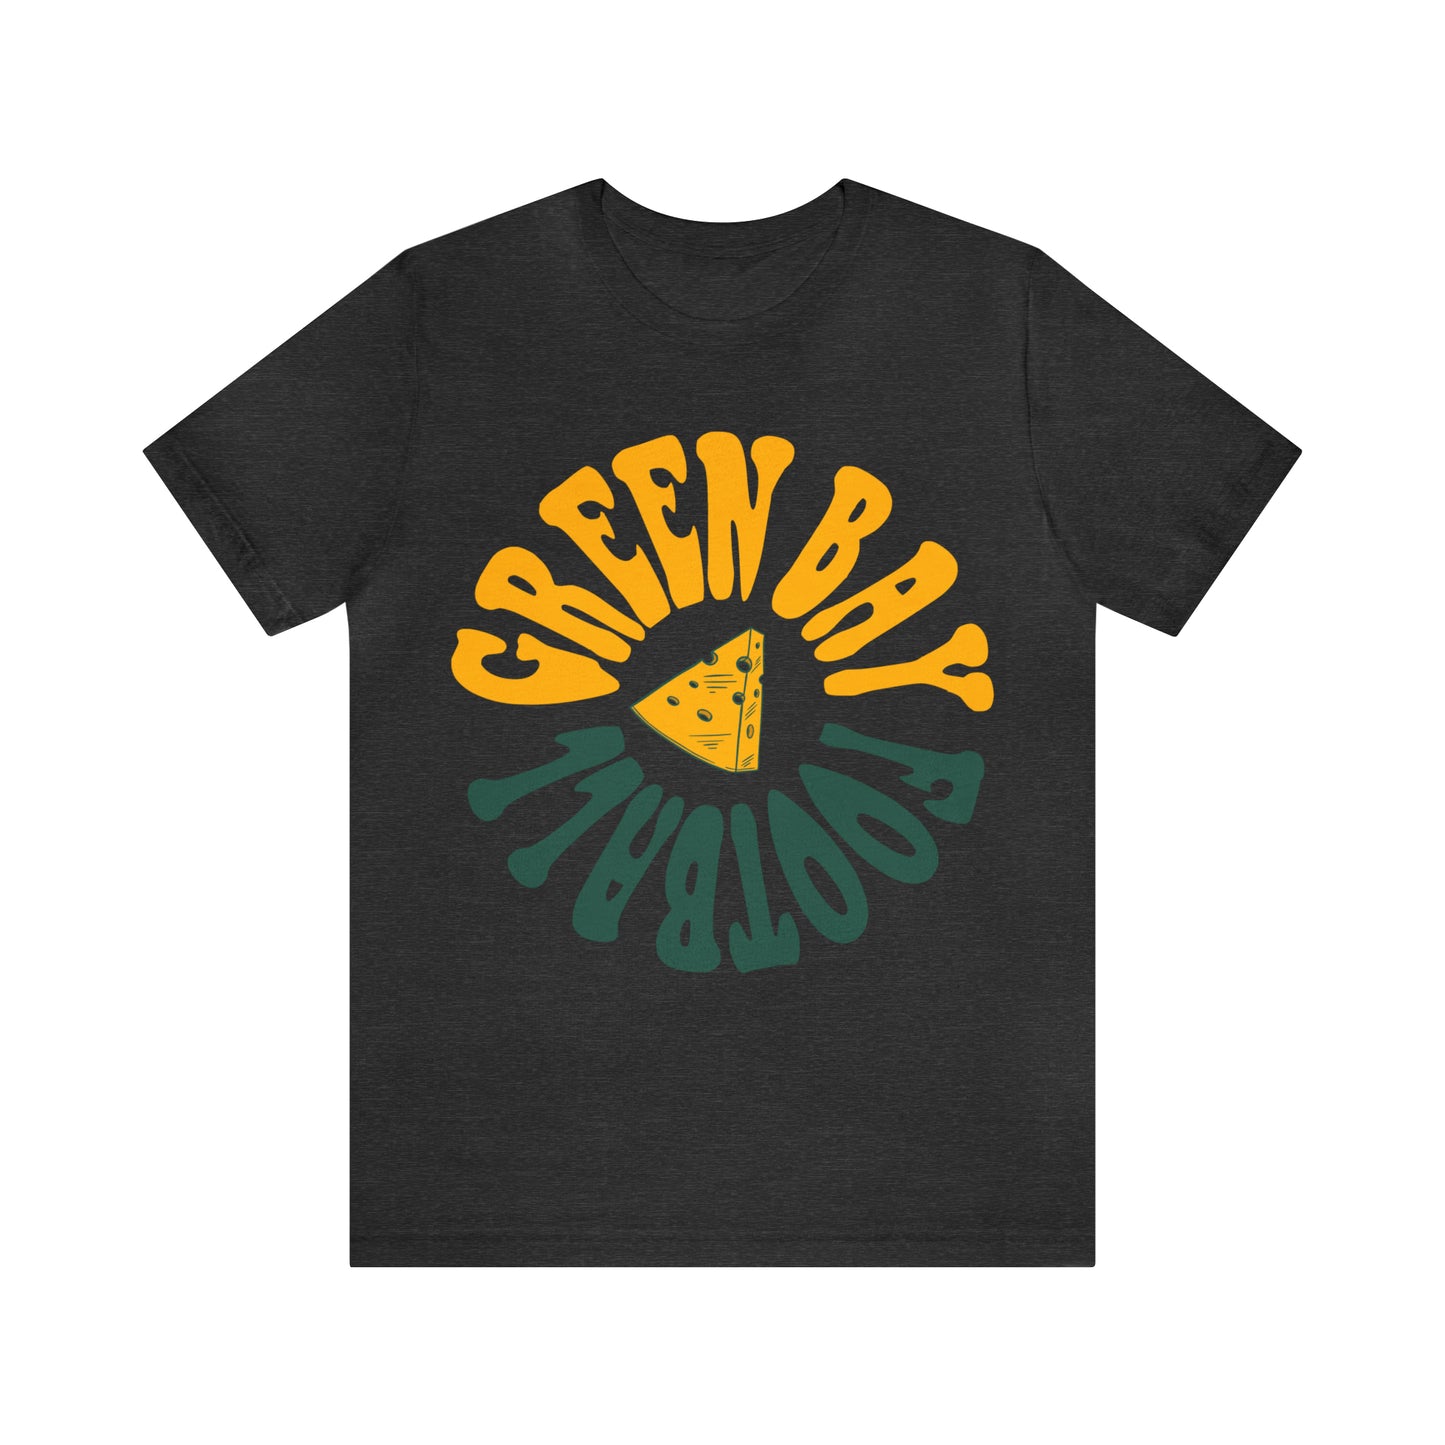 Hippy Green Bay Packers Retro Tee - Vintage Style T-Shirt - Wisconsin Cheese Head - Design 2